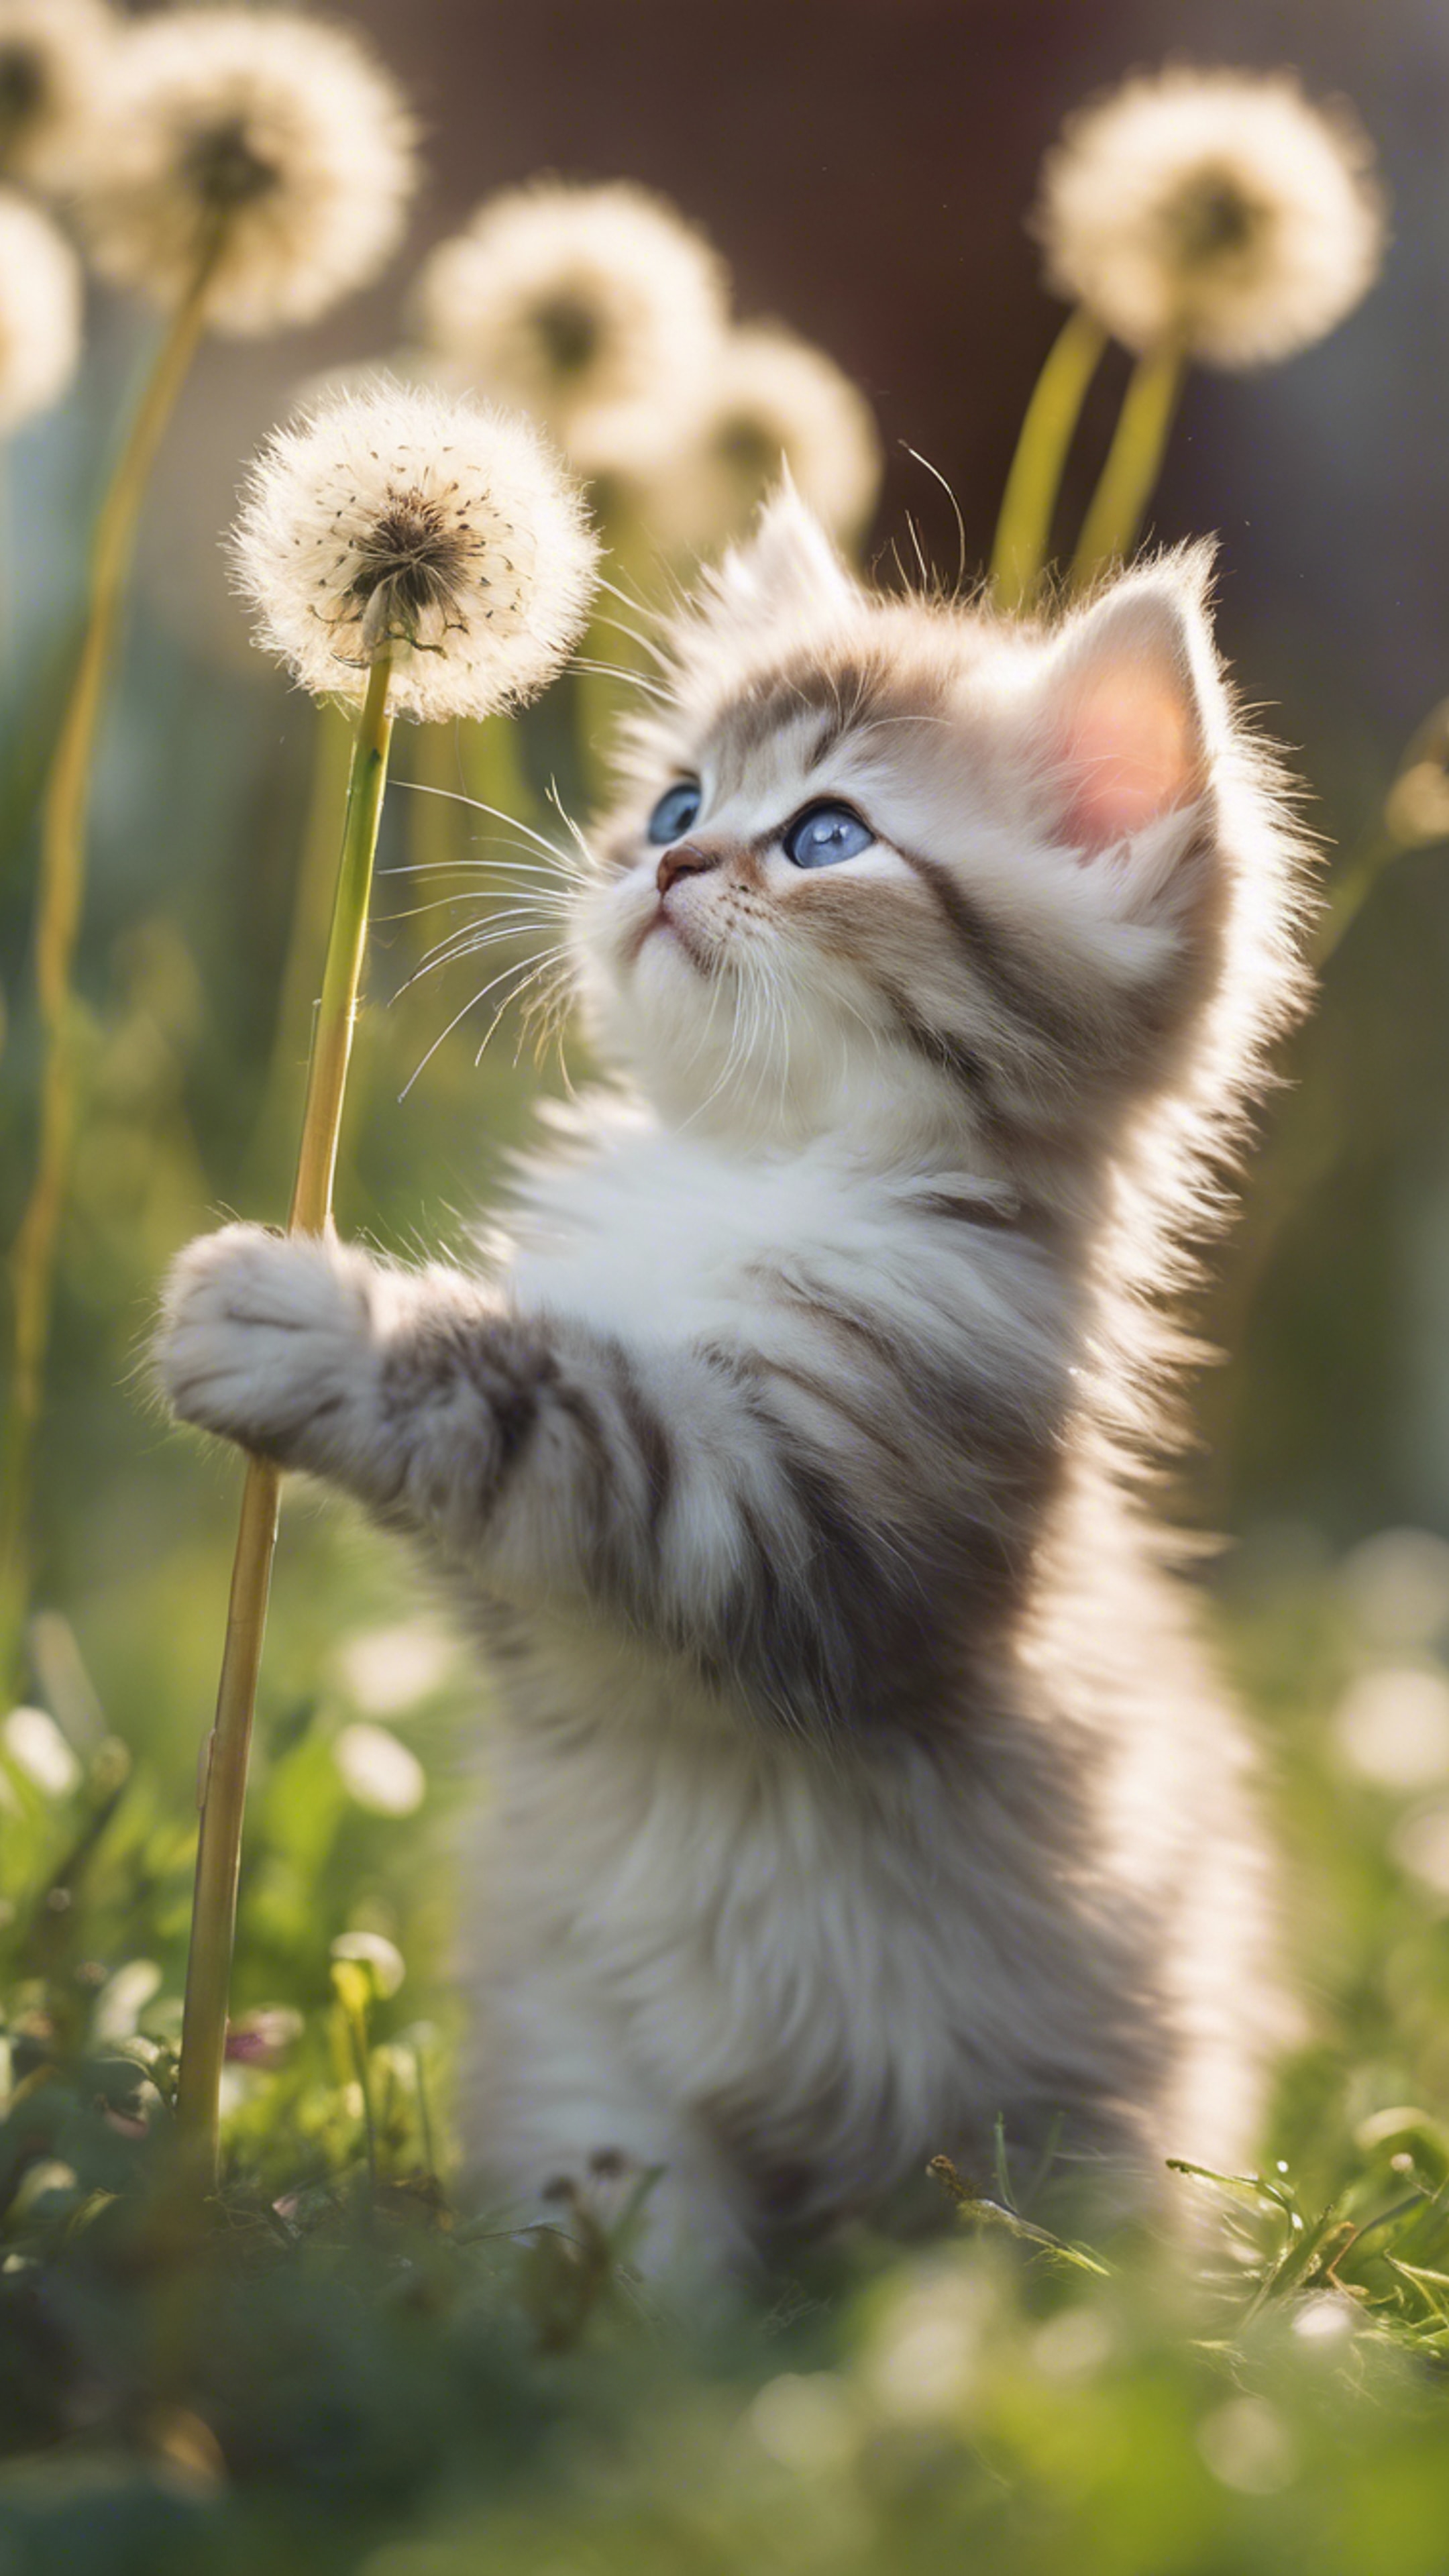 A curious Persian kitten playfully batting at a dandelishion puff in the midst of spring bloom. Tapetai[a1f5779e66044a4f83a1]